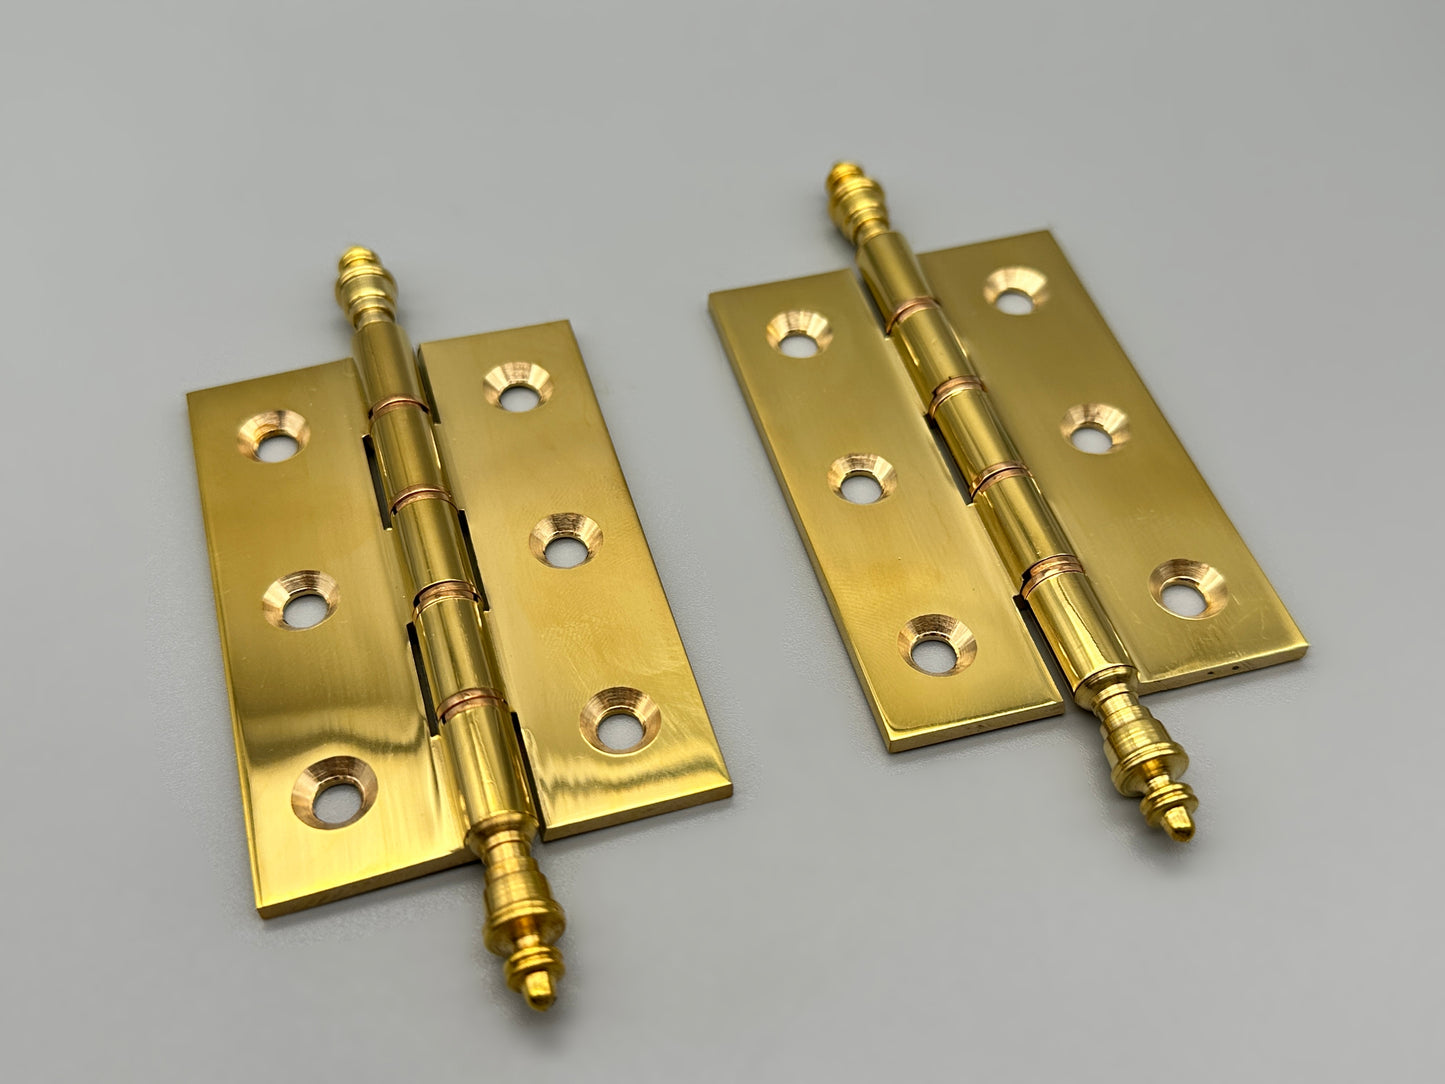 Pair of Solid Brass Hinges with Finials - Polished Brass - 76mm & 102mm - Pack of 2